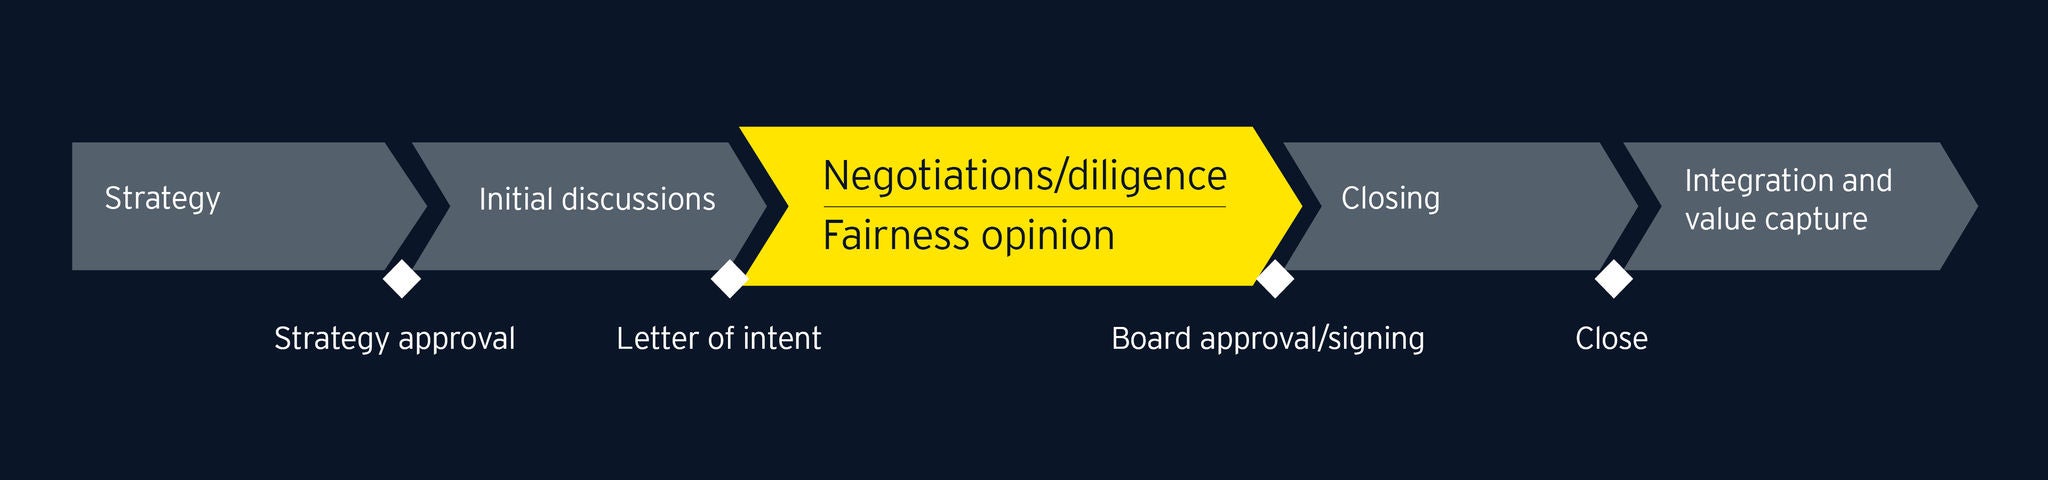 Agreement sign up with fairness opinion